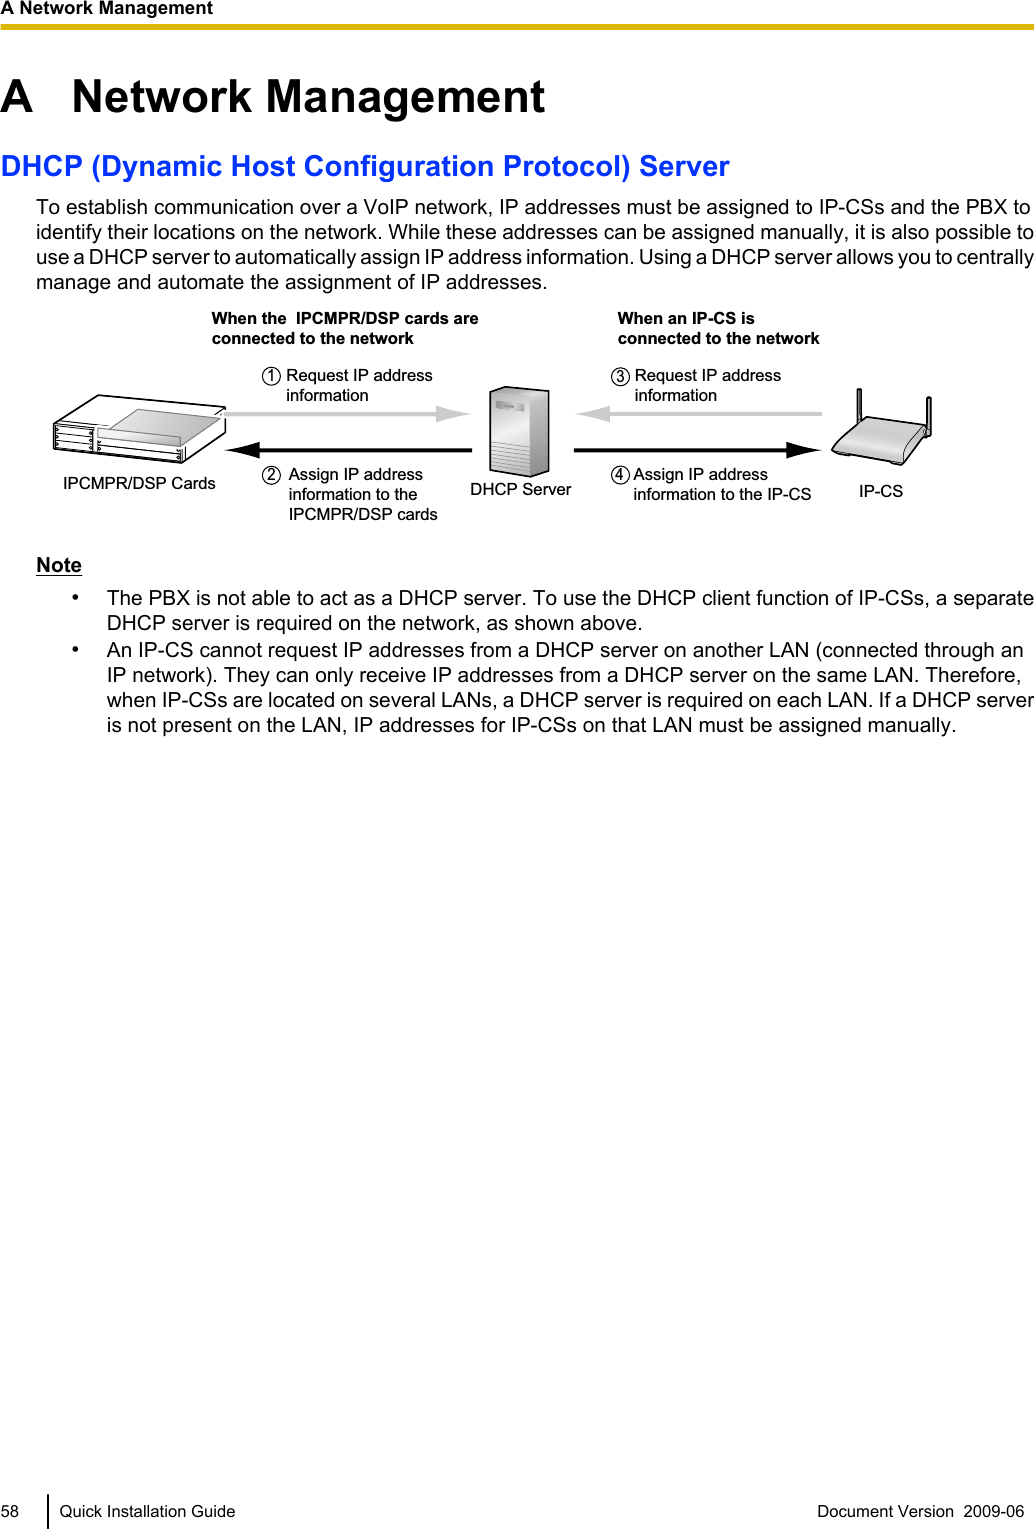 A   Network ManagementDHCP (Dynamic Host Configuration Protocol) ServerTo establish communication over a VoIP network, IP addresses must be assigned to IP-CSs and the PBX toidentify their locations on the network. While these addresses can be assigned manually, it is also possible touse a DHCP server to automatically assign IP address information. Using a DHCP server allows you to centrallymanage and automate the assignment of IP addresses.Assign IP address information to the IP-CSWhen the  IPCMPR/DSP cards are connected to the networkWhen an IP-CS is connected to the networkRequest IP addressinformation 1Assign IP address information to the IPCMPR/DSP cards2Request IP addressinformation34IP-CSDHCP ServerIPCMPR/DSP CardsNote•The PBX is not able to act as a DHCP server. To use the DHCP client function of IP-CSs, a separateDHCP server is required on the network, as shown above.•An IP-CS cannot request IP addresses from a DHCP server on another LAN (connected through anIP network). They can only receive IP addresses from a DHCP server on the same LAN. Therefore,when IP-CSs are located on several LANs, a DHCP server is required on each LAN. If a DHCP serveris not present on the LAN, IP addresses for IP-CSs on that LAN must be assigned manually.58 Quick Installation Guide Document Version  2009-06  A Network Management